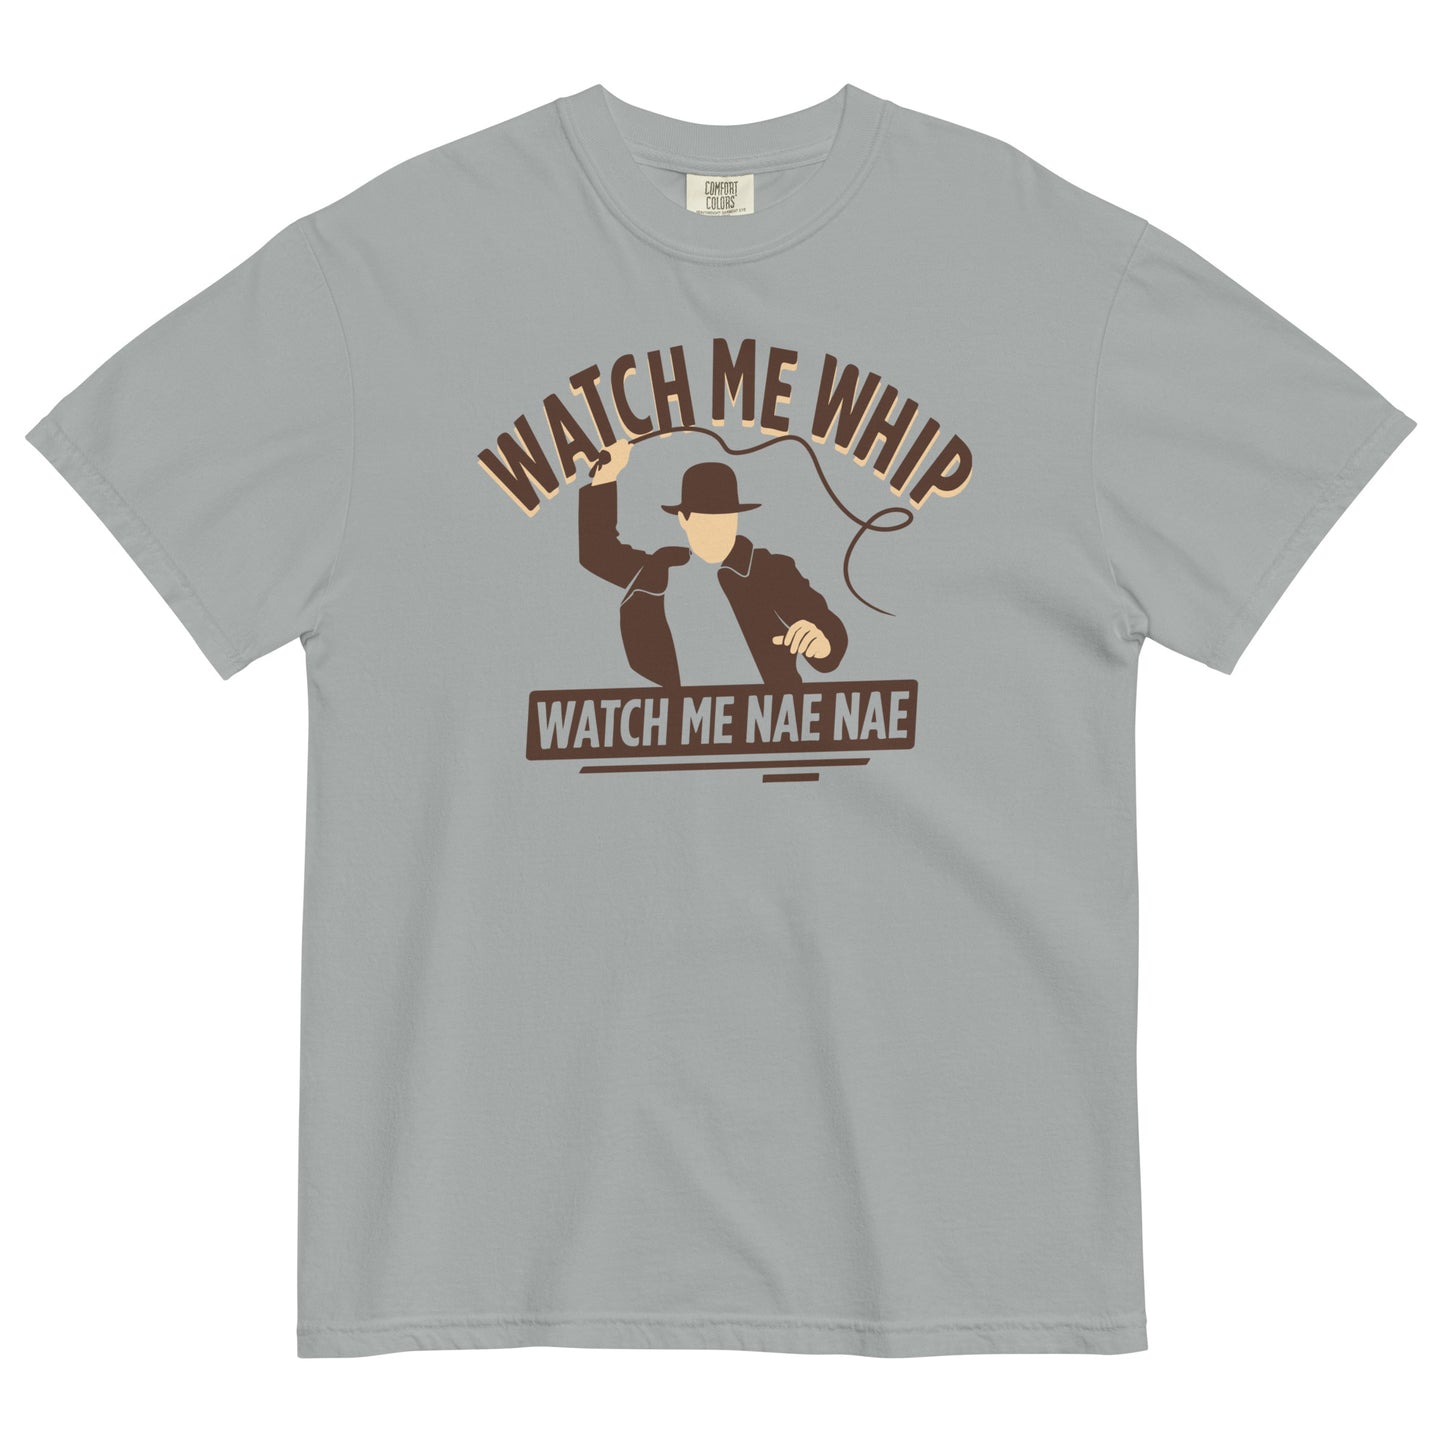 Watch Me Whip Men's Relaxed Fit Tee